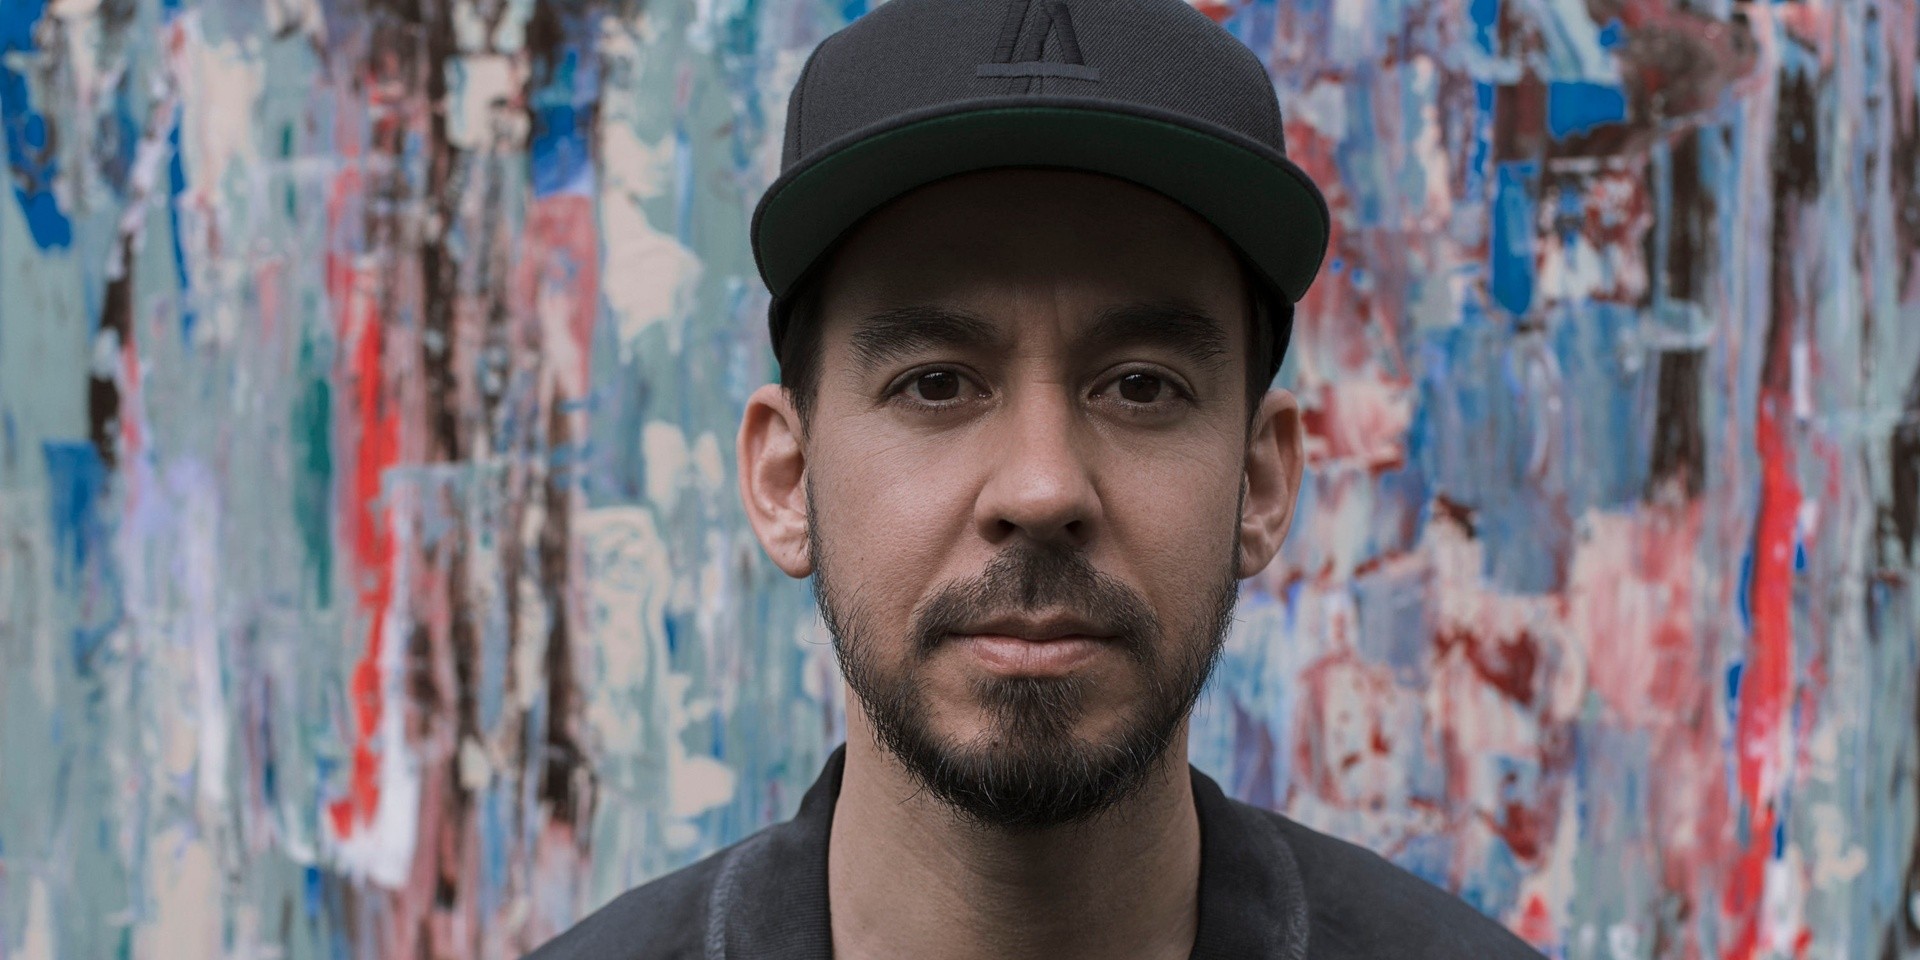 Mike Shinoda wants to produce your track live on Twitch